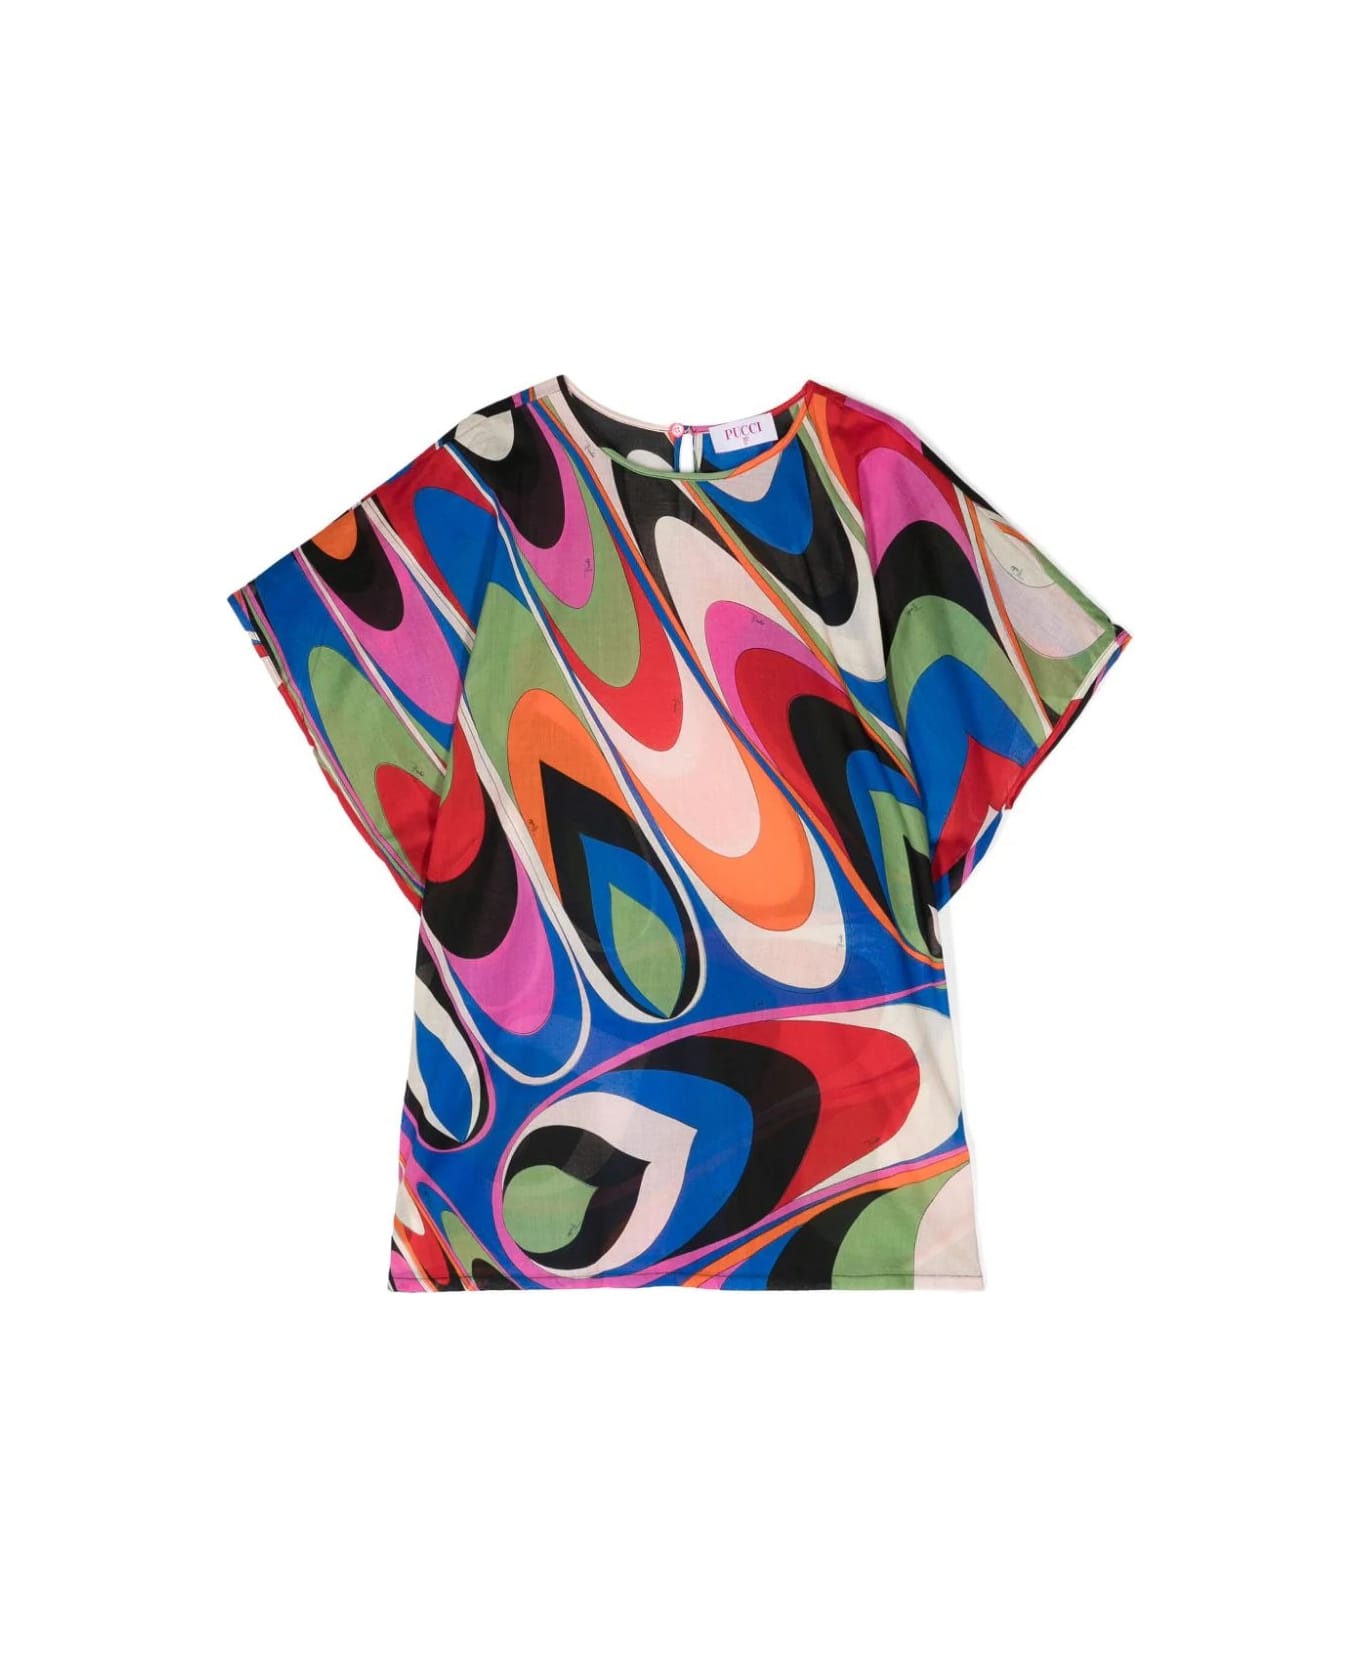 Pucci Multicoloured Wave Print Short Sleeved Dress - Multicolour